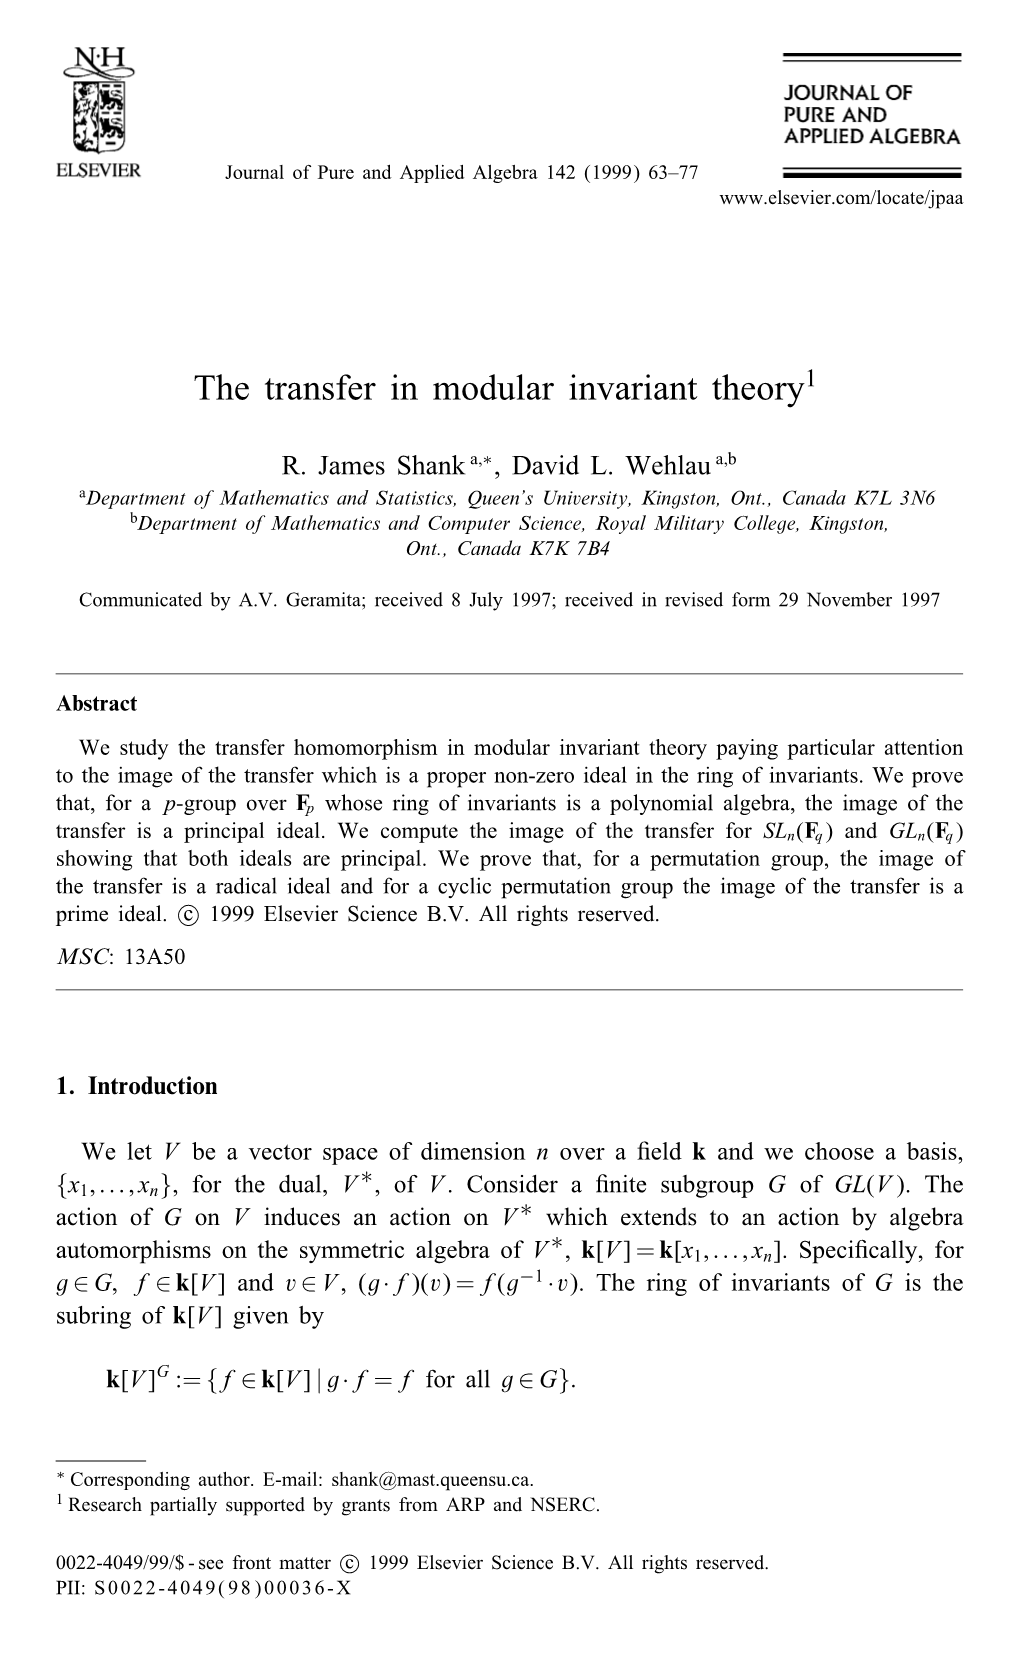 The Transfer in Modular Invariant Theory1